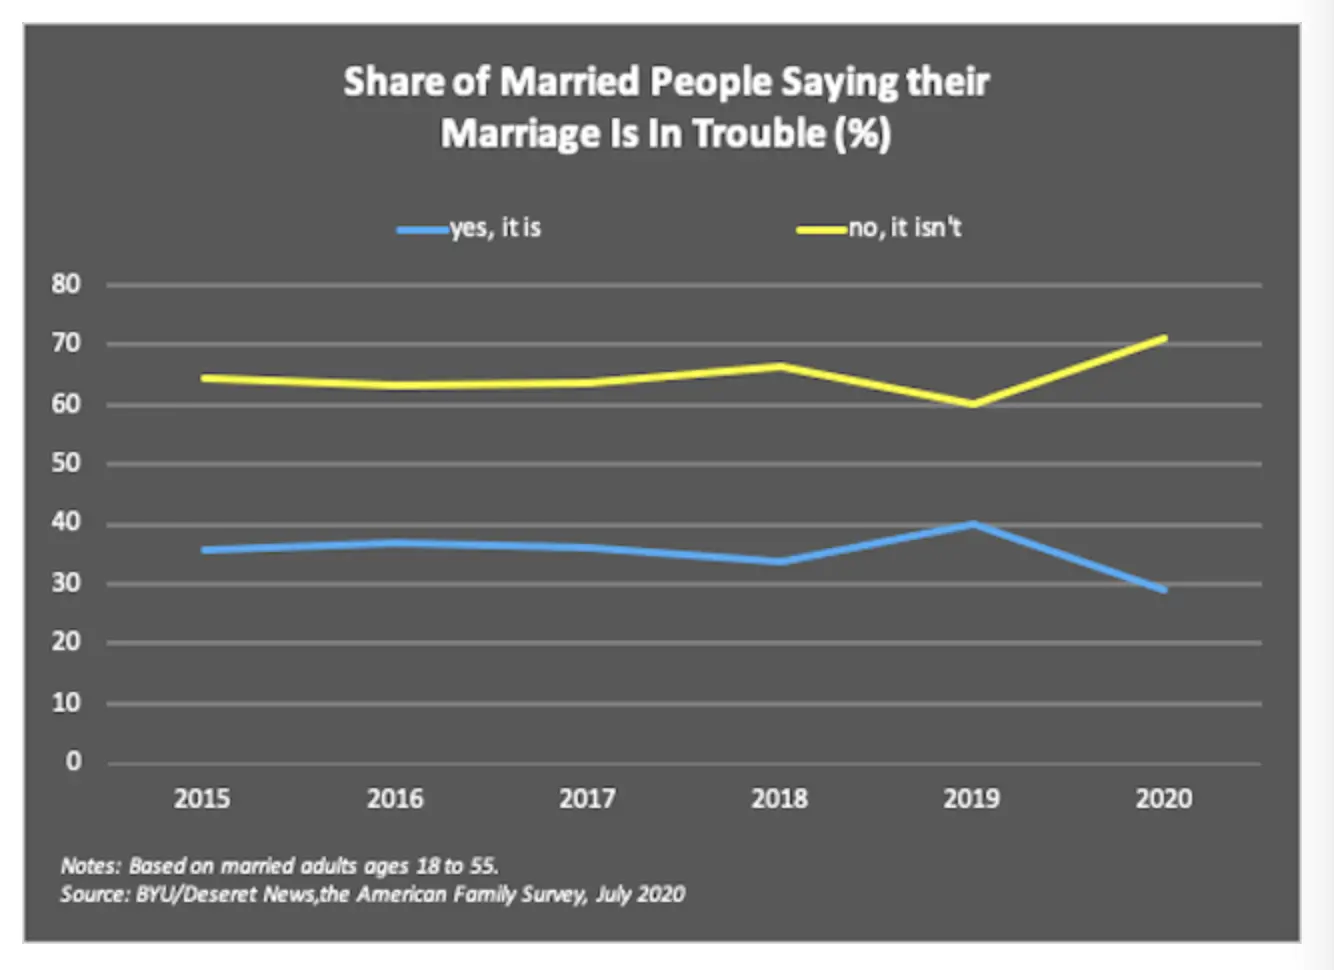 Infographic 6 - Share of married people saying their marriage is in trouble